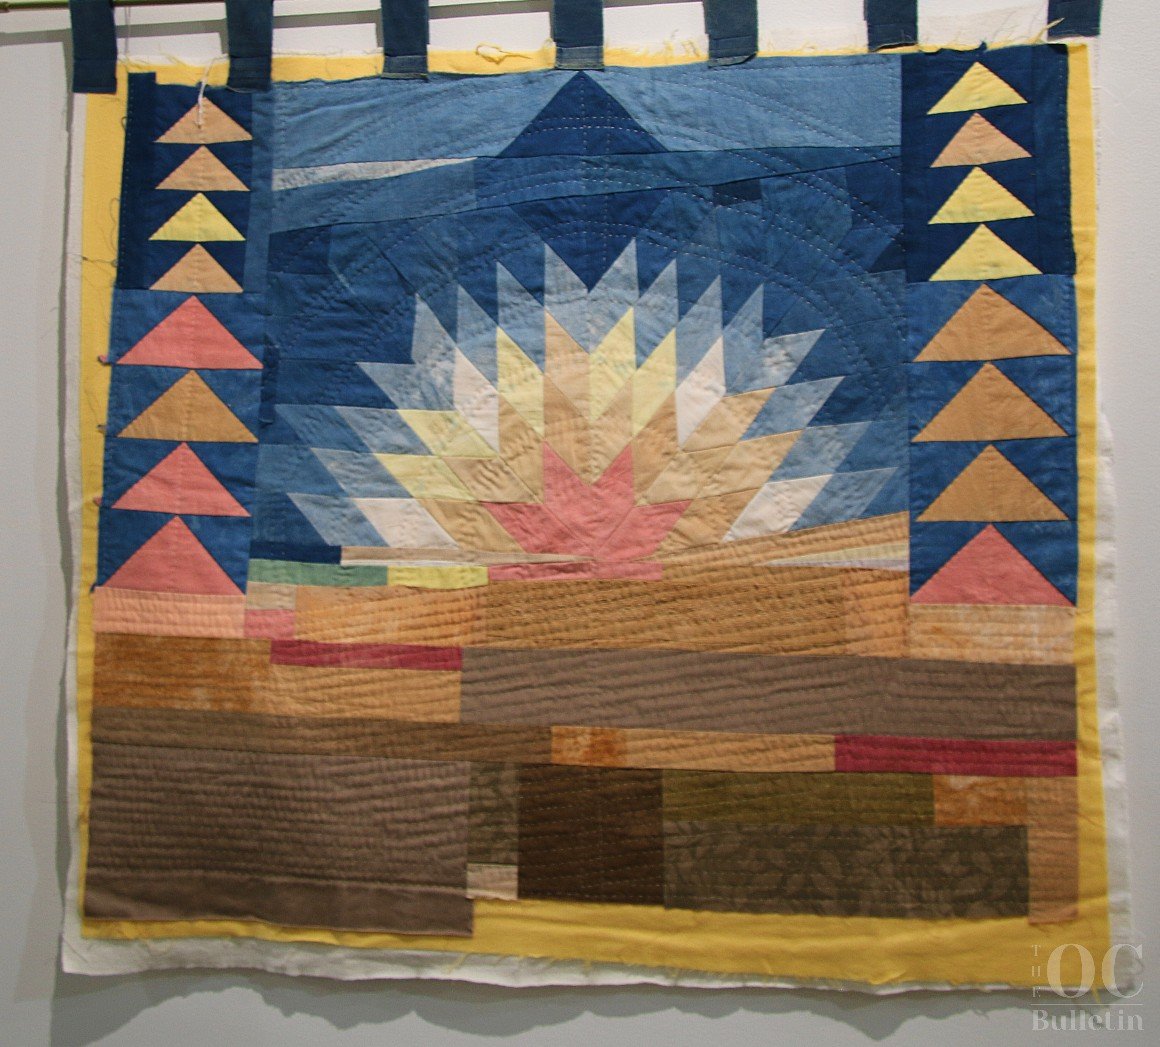  “Fulcrum,” a quilt made from salvaged and hand-dyed fabrics by Amanda Wagstaff. (Photo Credit: Andra Landi) 